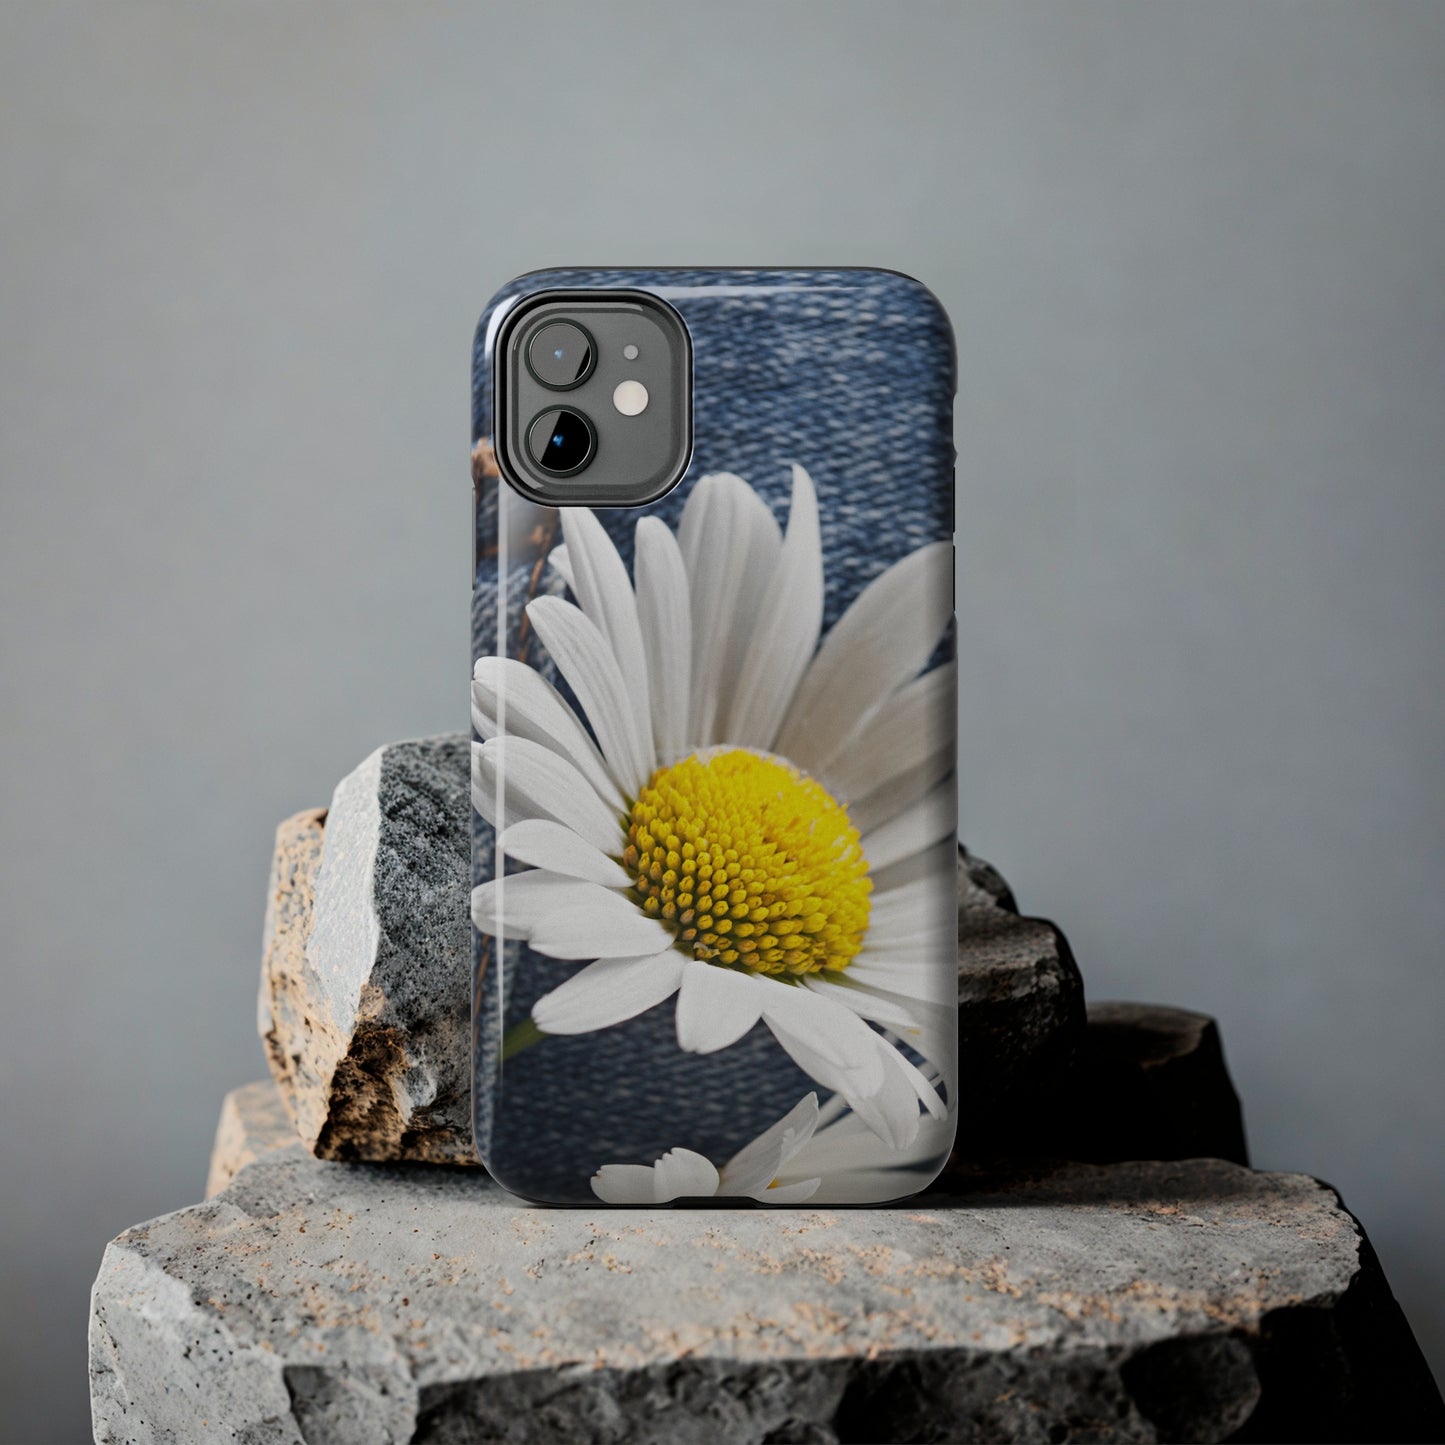 Denim & Daisy Only / iPhone Case